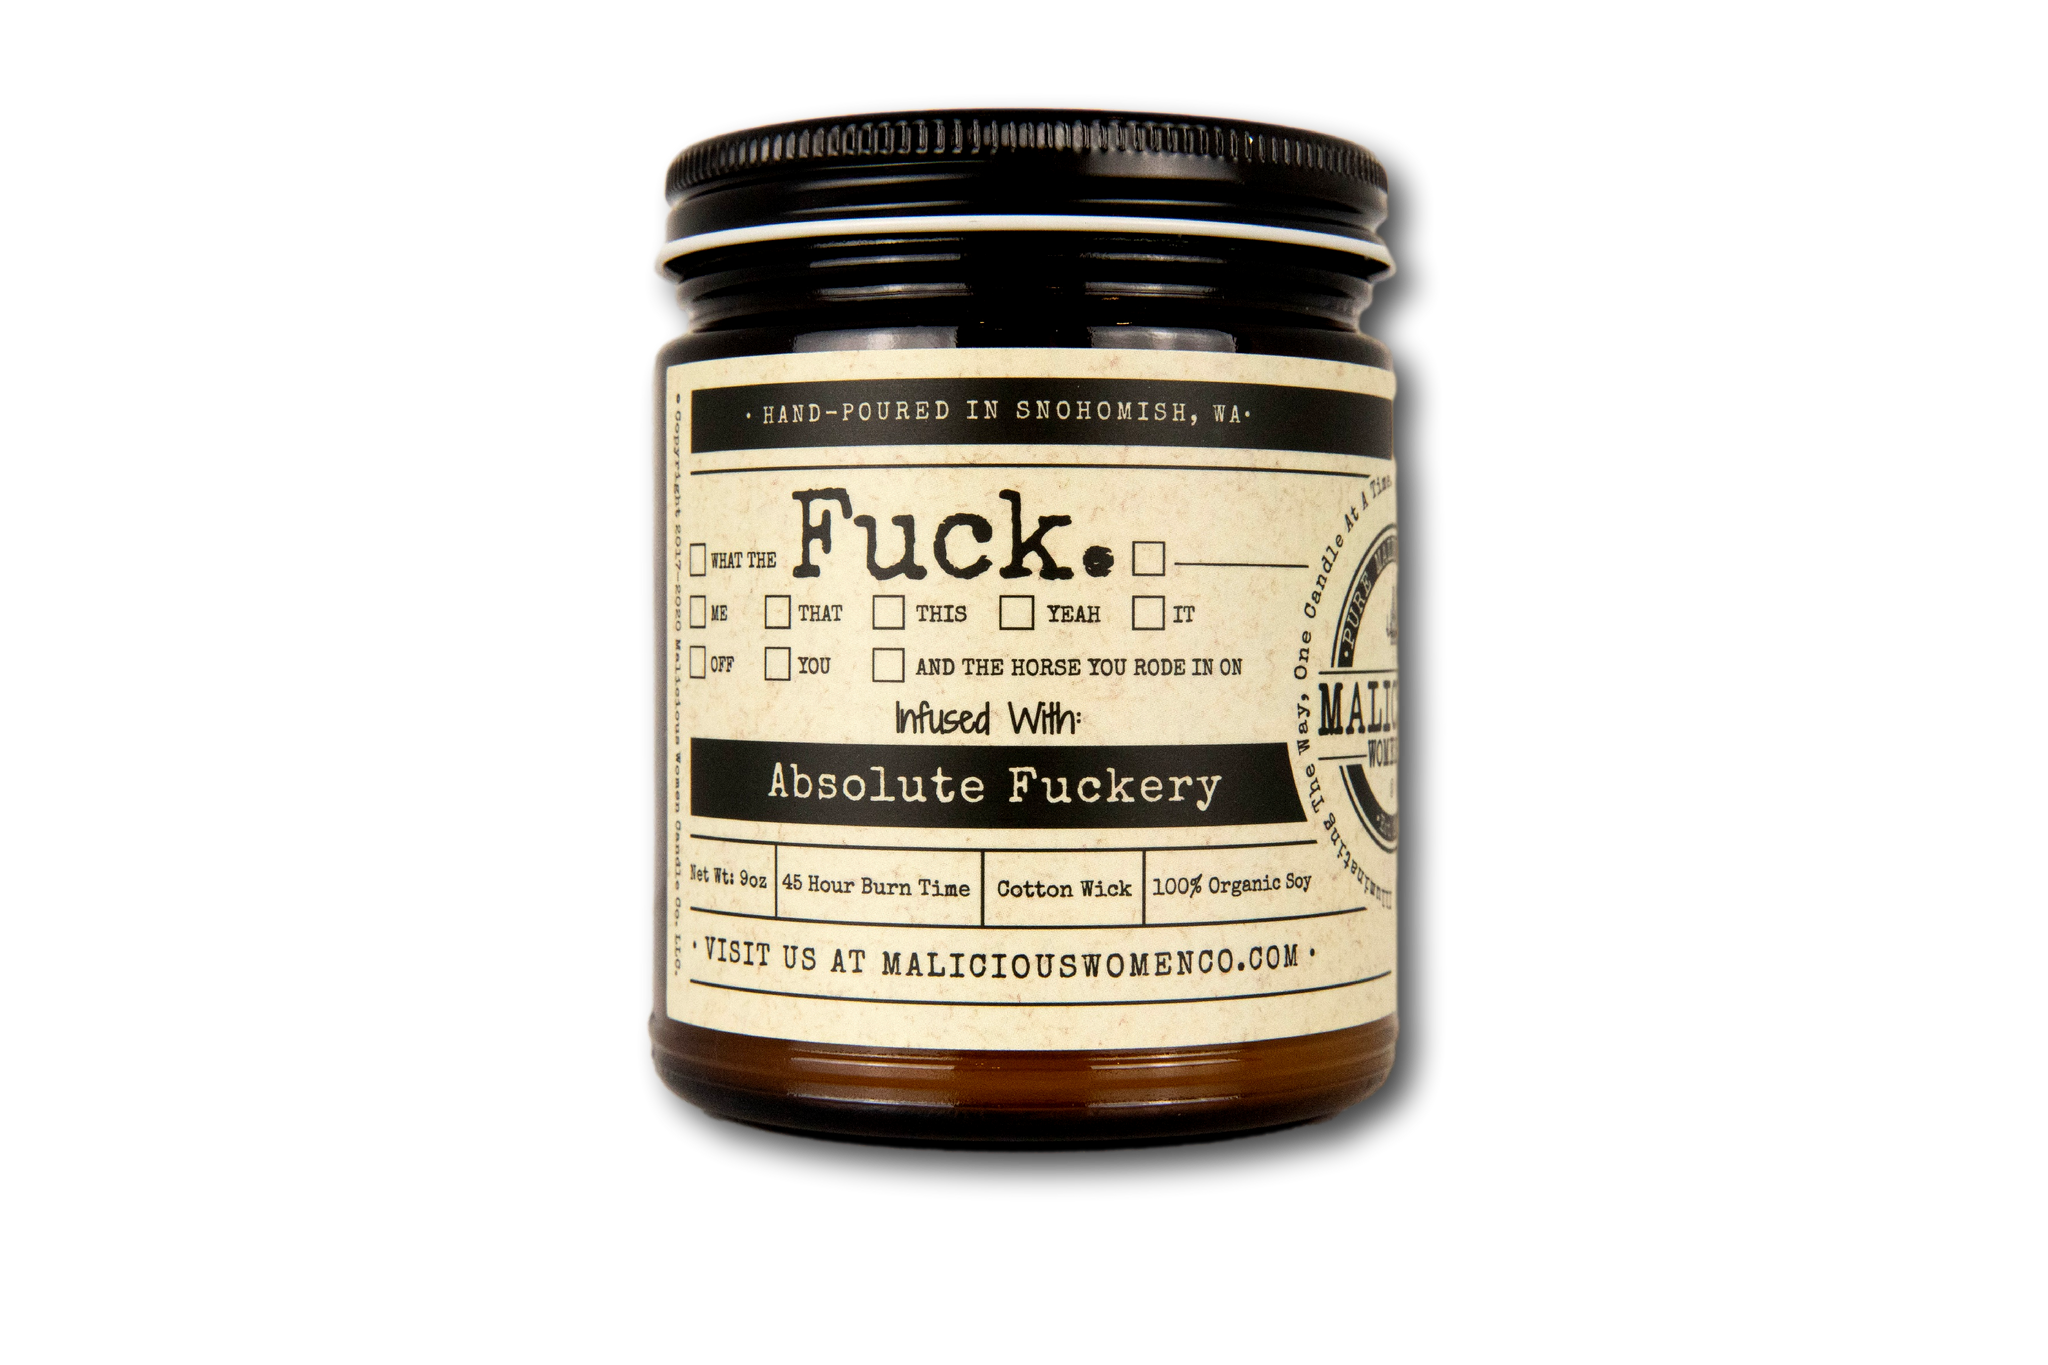 Malicious Women Candle Co - All The Fucks - Infused with Absolute Fuckery